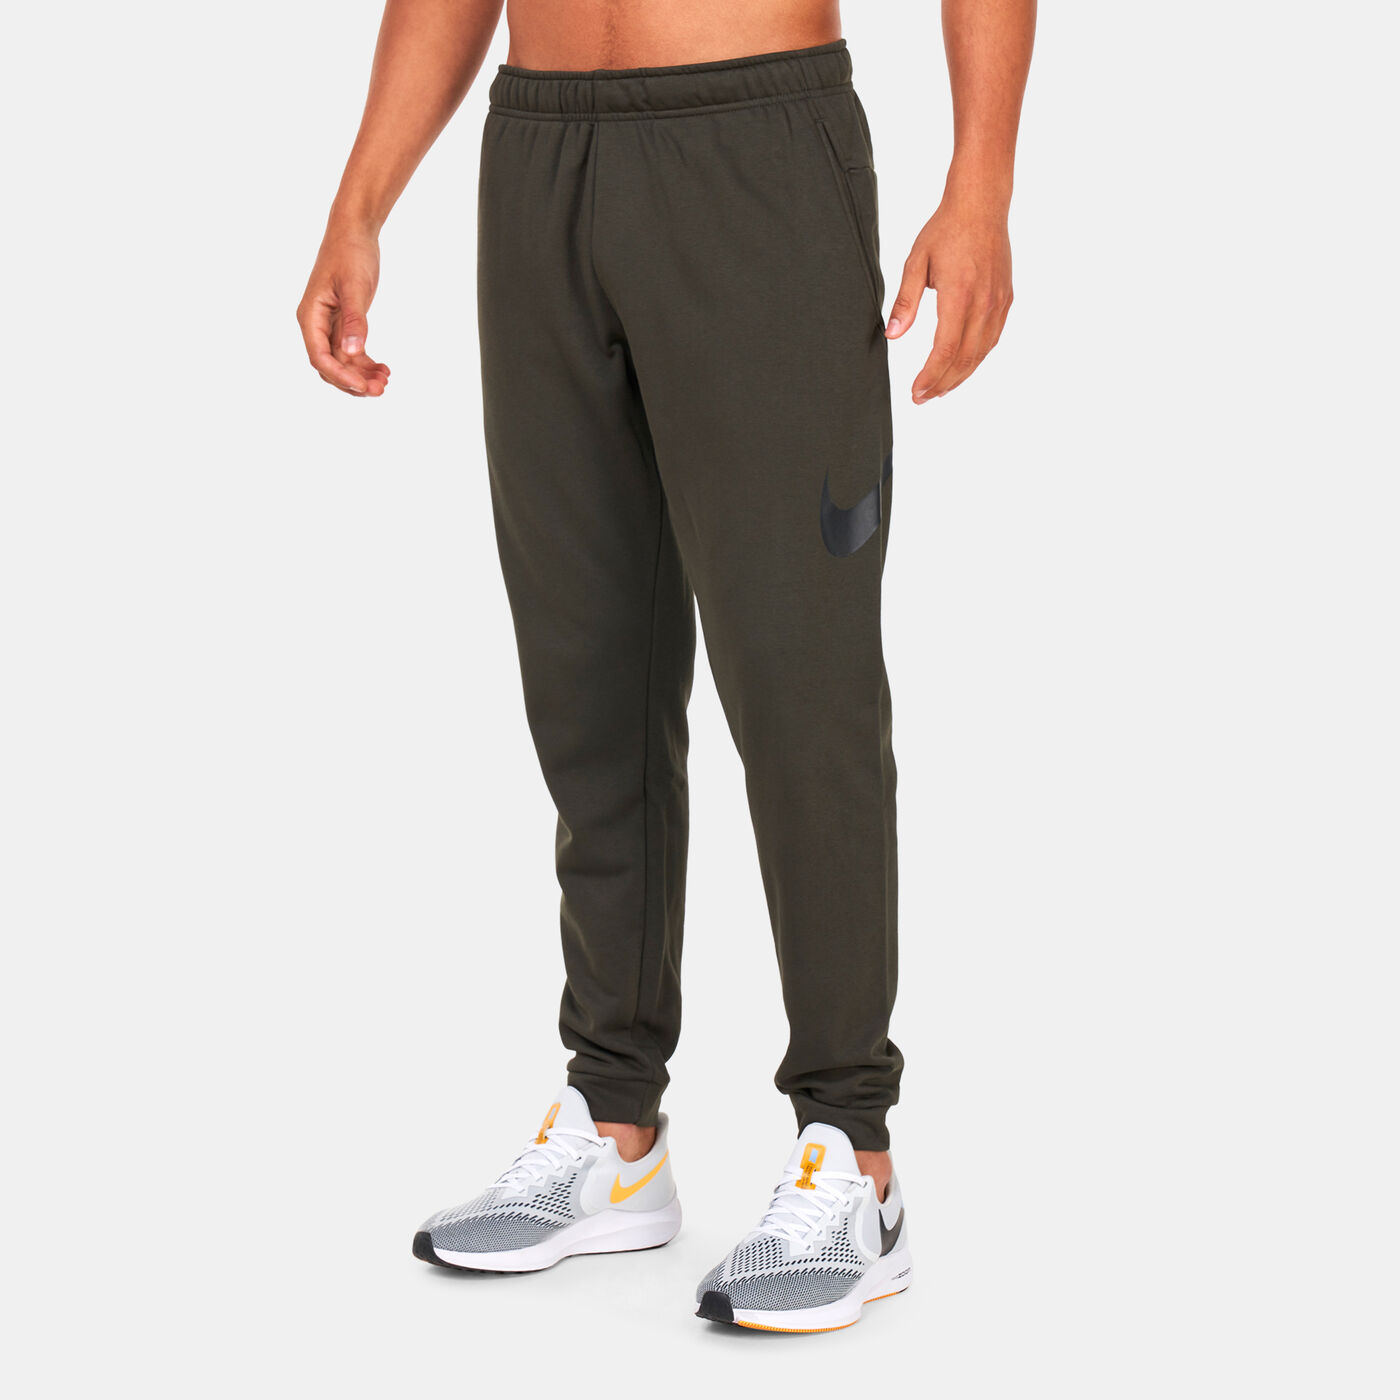 Men's Dri-FIT Dry Graphic Tapered Training Pants